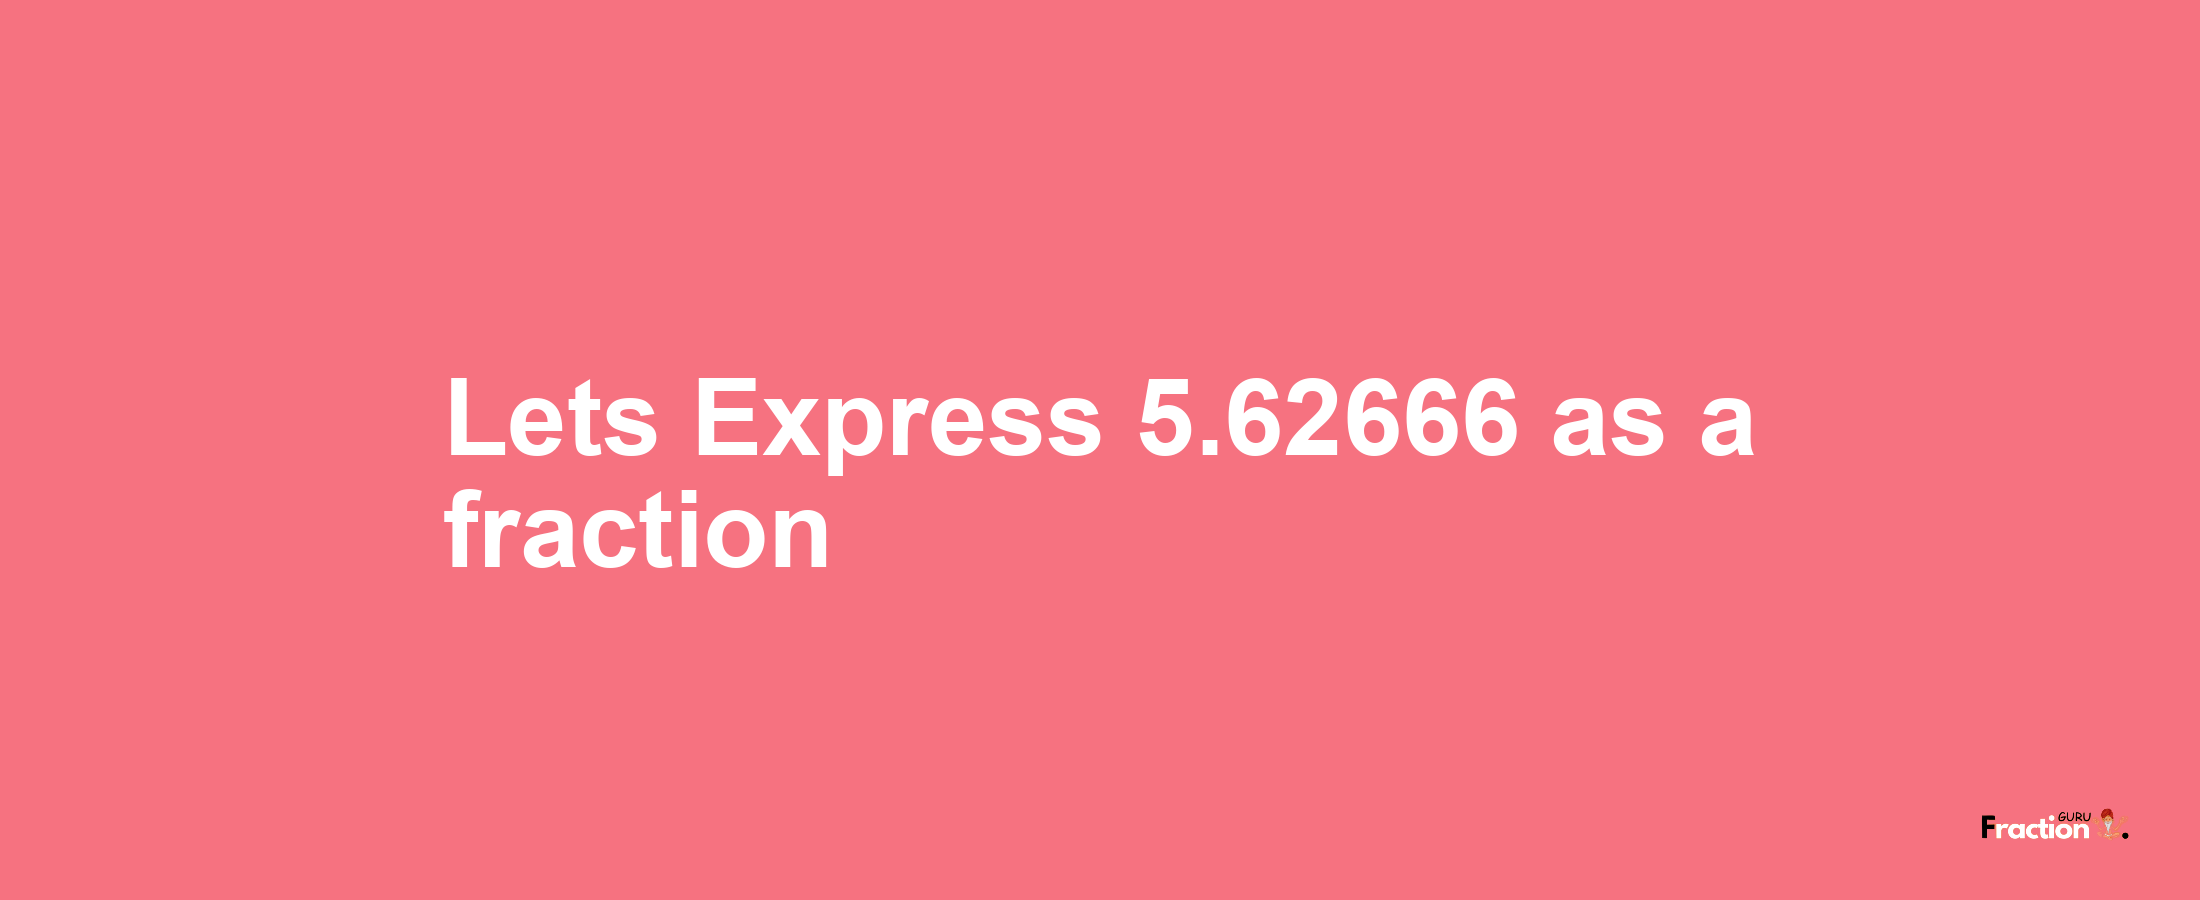 Lets Express 5.62666 as afraction